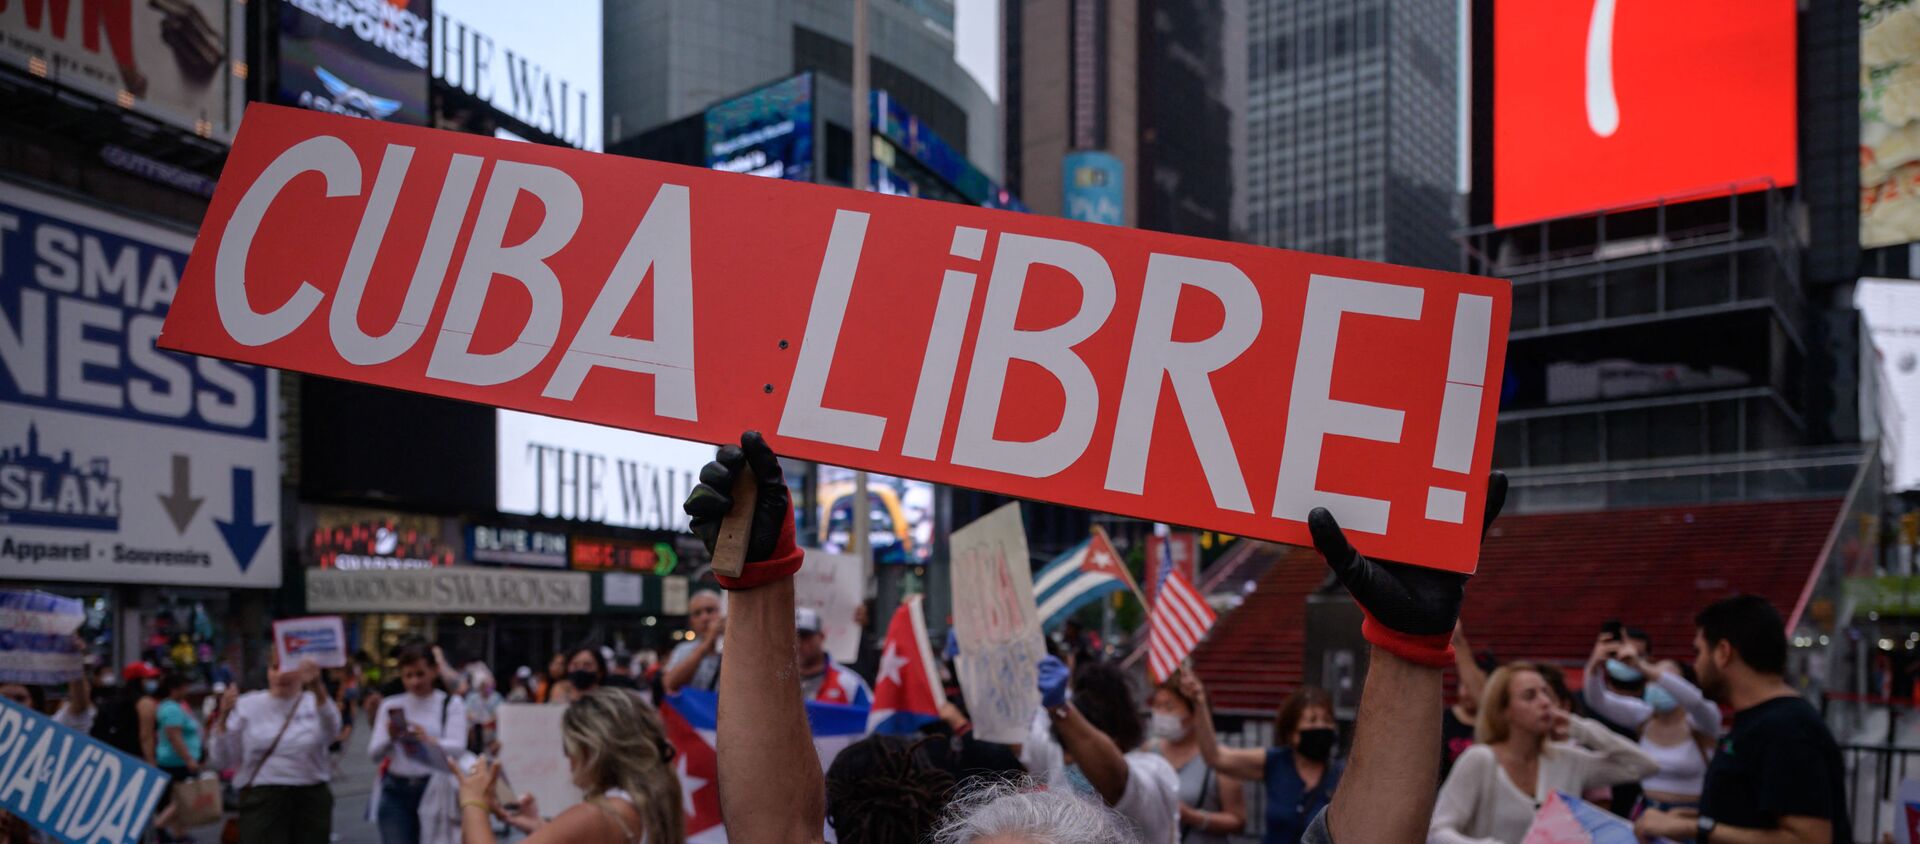 Demonstrators hold placards during a rally held in solidarity with anti-government protests in Cuba, in Times Square, New York on July 13, 2021. - One person died and more than 100 others, including independent journalists and dissidents, have been arrested after unprecedented anti-government protests in Cuba, with some remaining in custody on Tuesday, observers and activists said. - Sputnik International, 1920, 14.07.2021